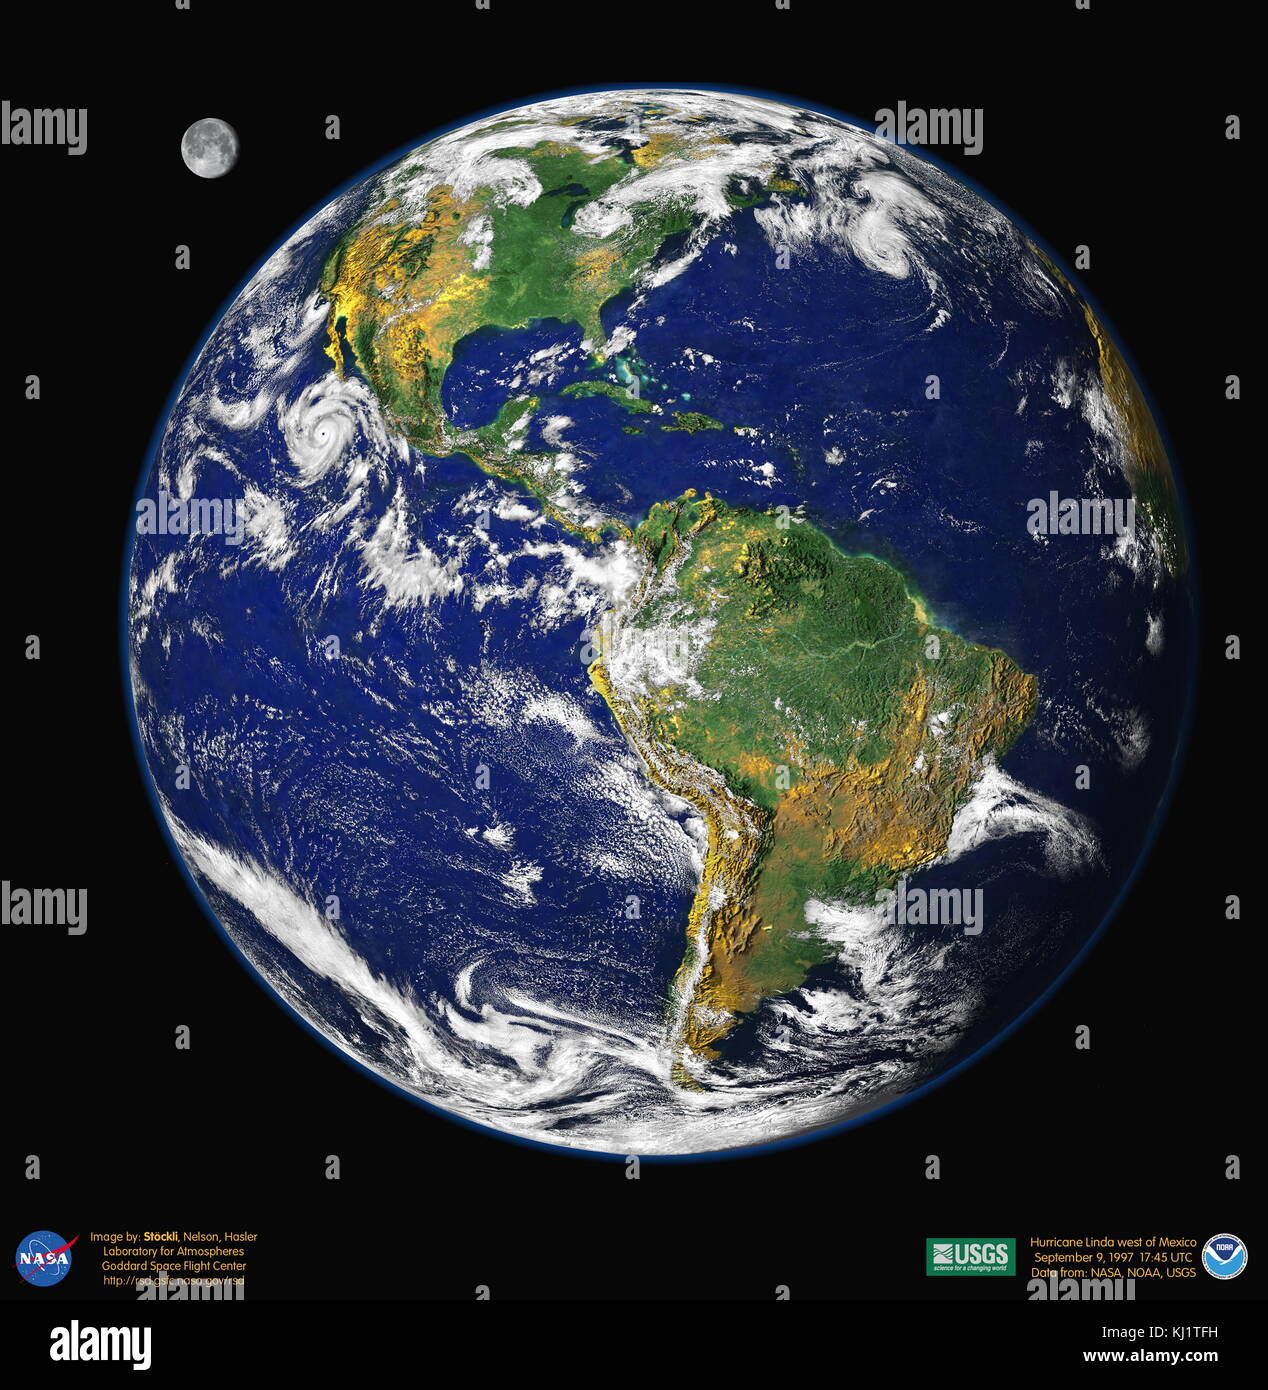 A composite image of the Western hemisphere of the Earth    Credit:  Image created by Reto Stockli with the help of Alan Nelson, under the leadership of Fritz Hasler 1997 Stock Photo